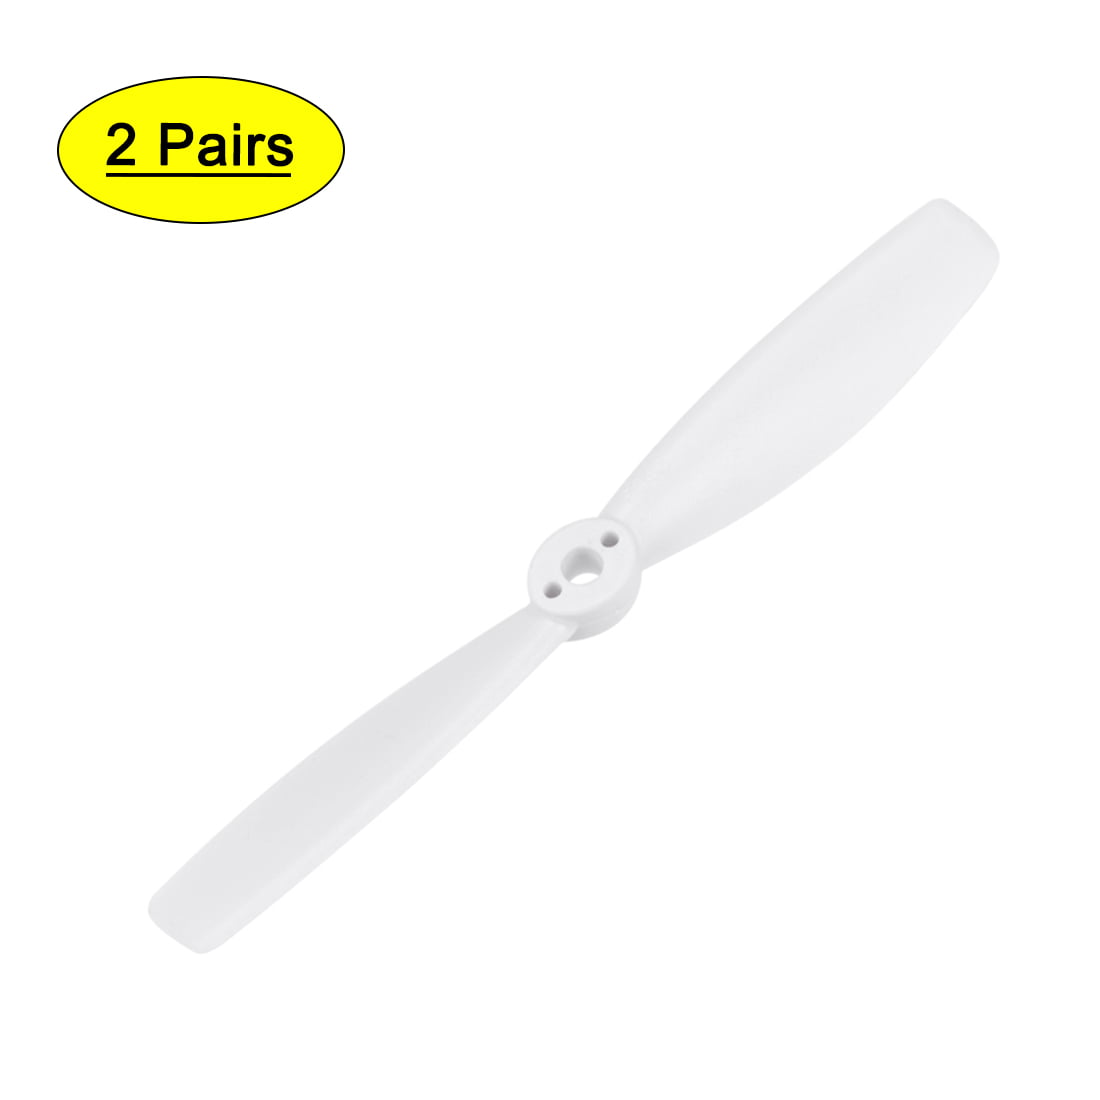 Details about   2 Pair Bullnose Propeller 5045 5x4.5 CW CCW 2-Vane RC Quadcopter Multirotor Blue 